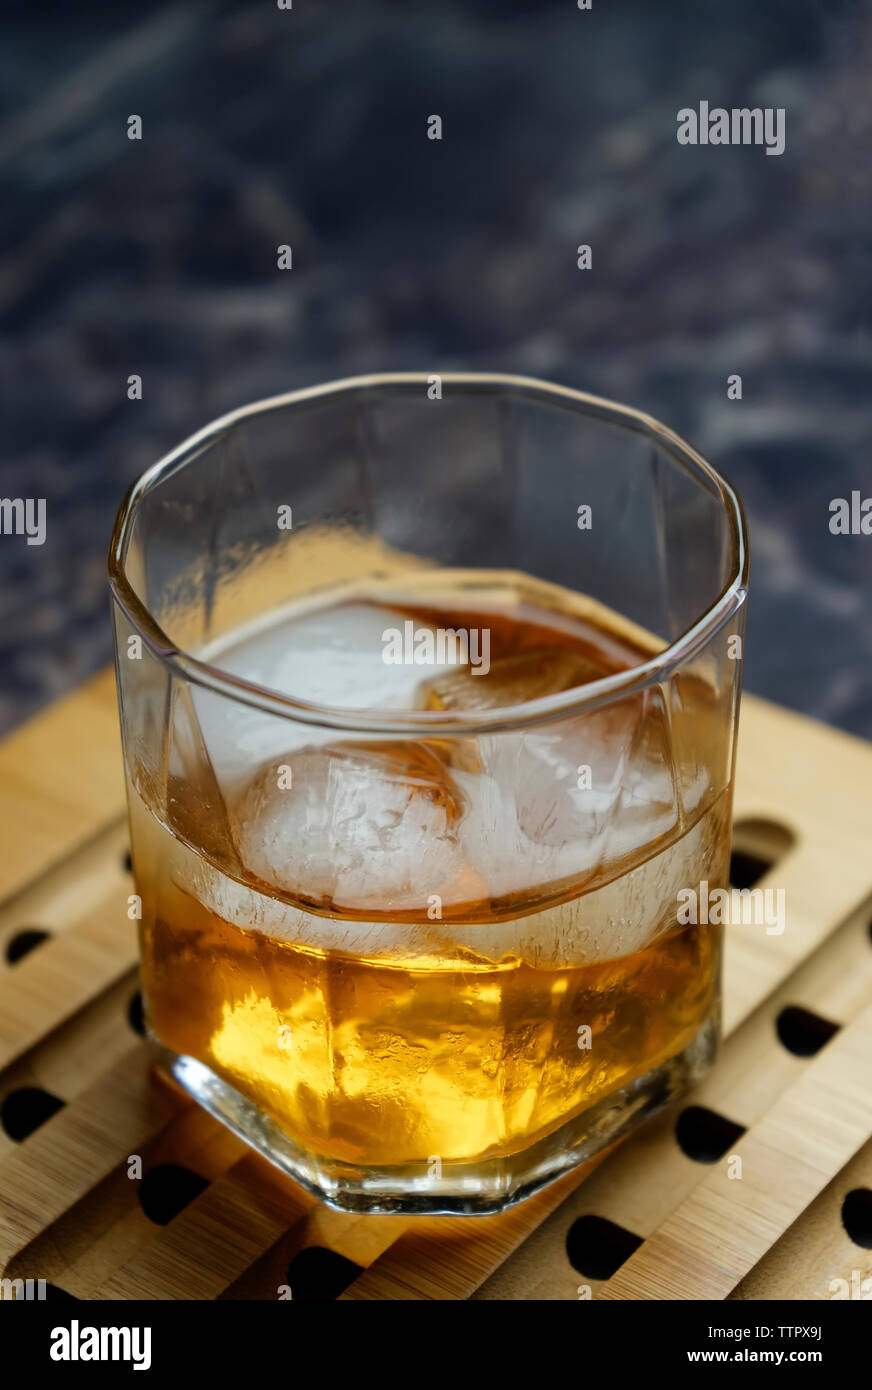 Close-up of ice cubes in alcoholic drink on tray Banque D'Images